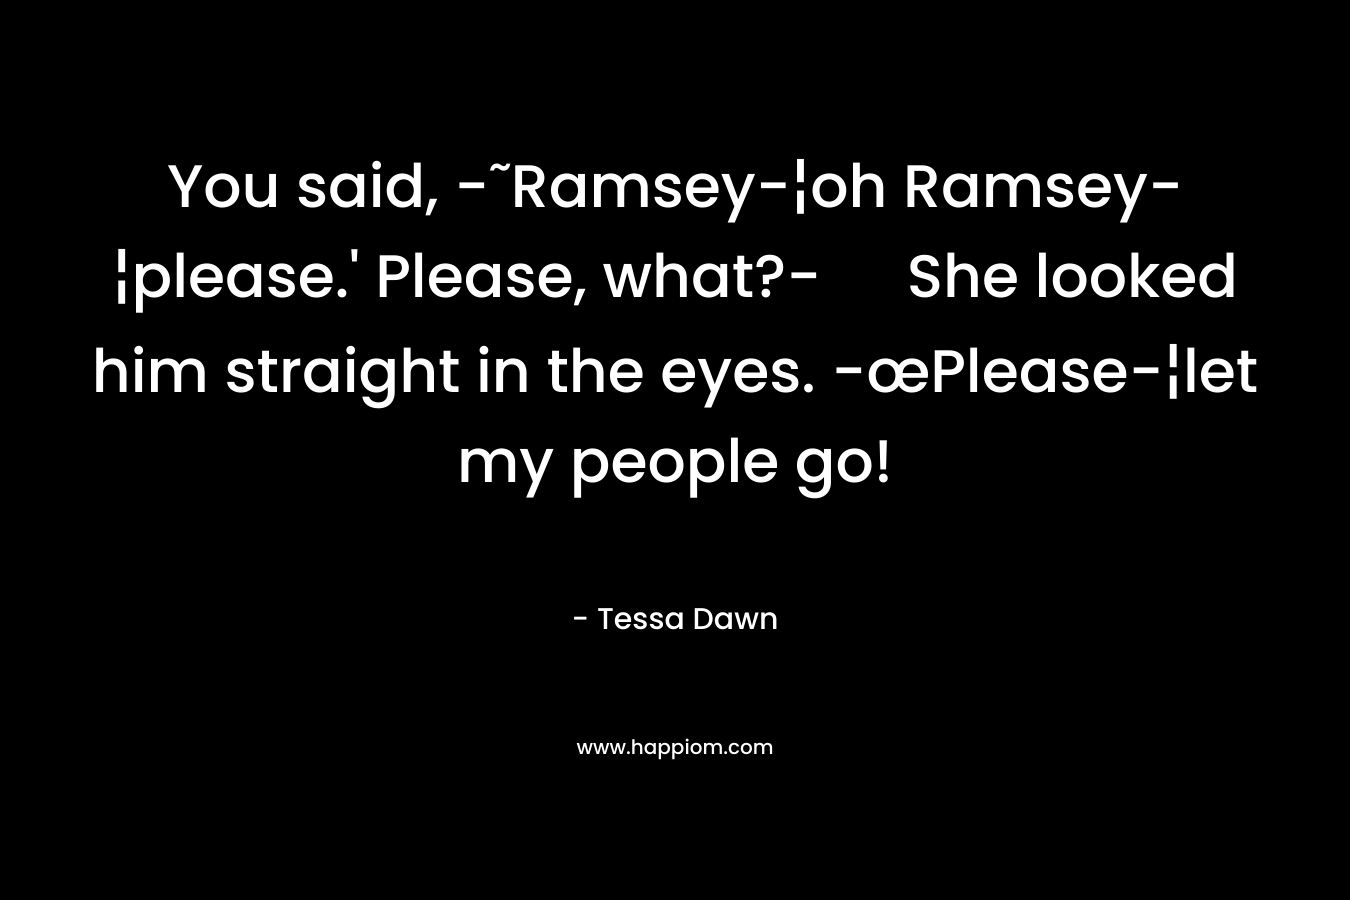 You said, -˜Ramsey-¦oh Ramsey-¦please.' Please, what?- She looked him straight in the eyes. -œPlease-¦let my people go!